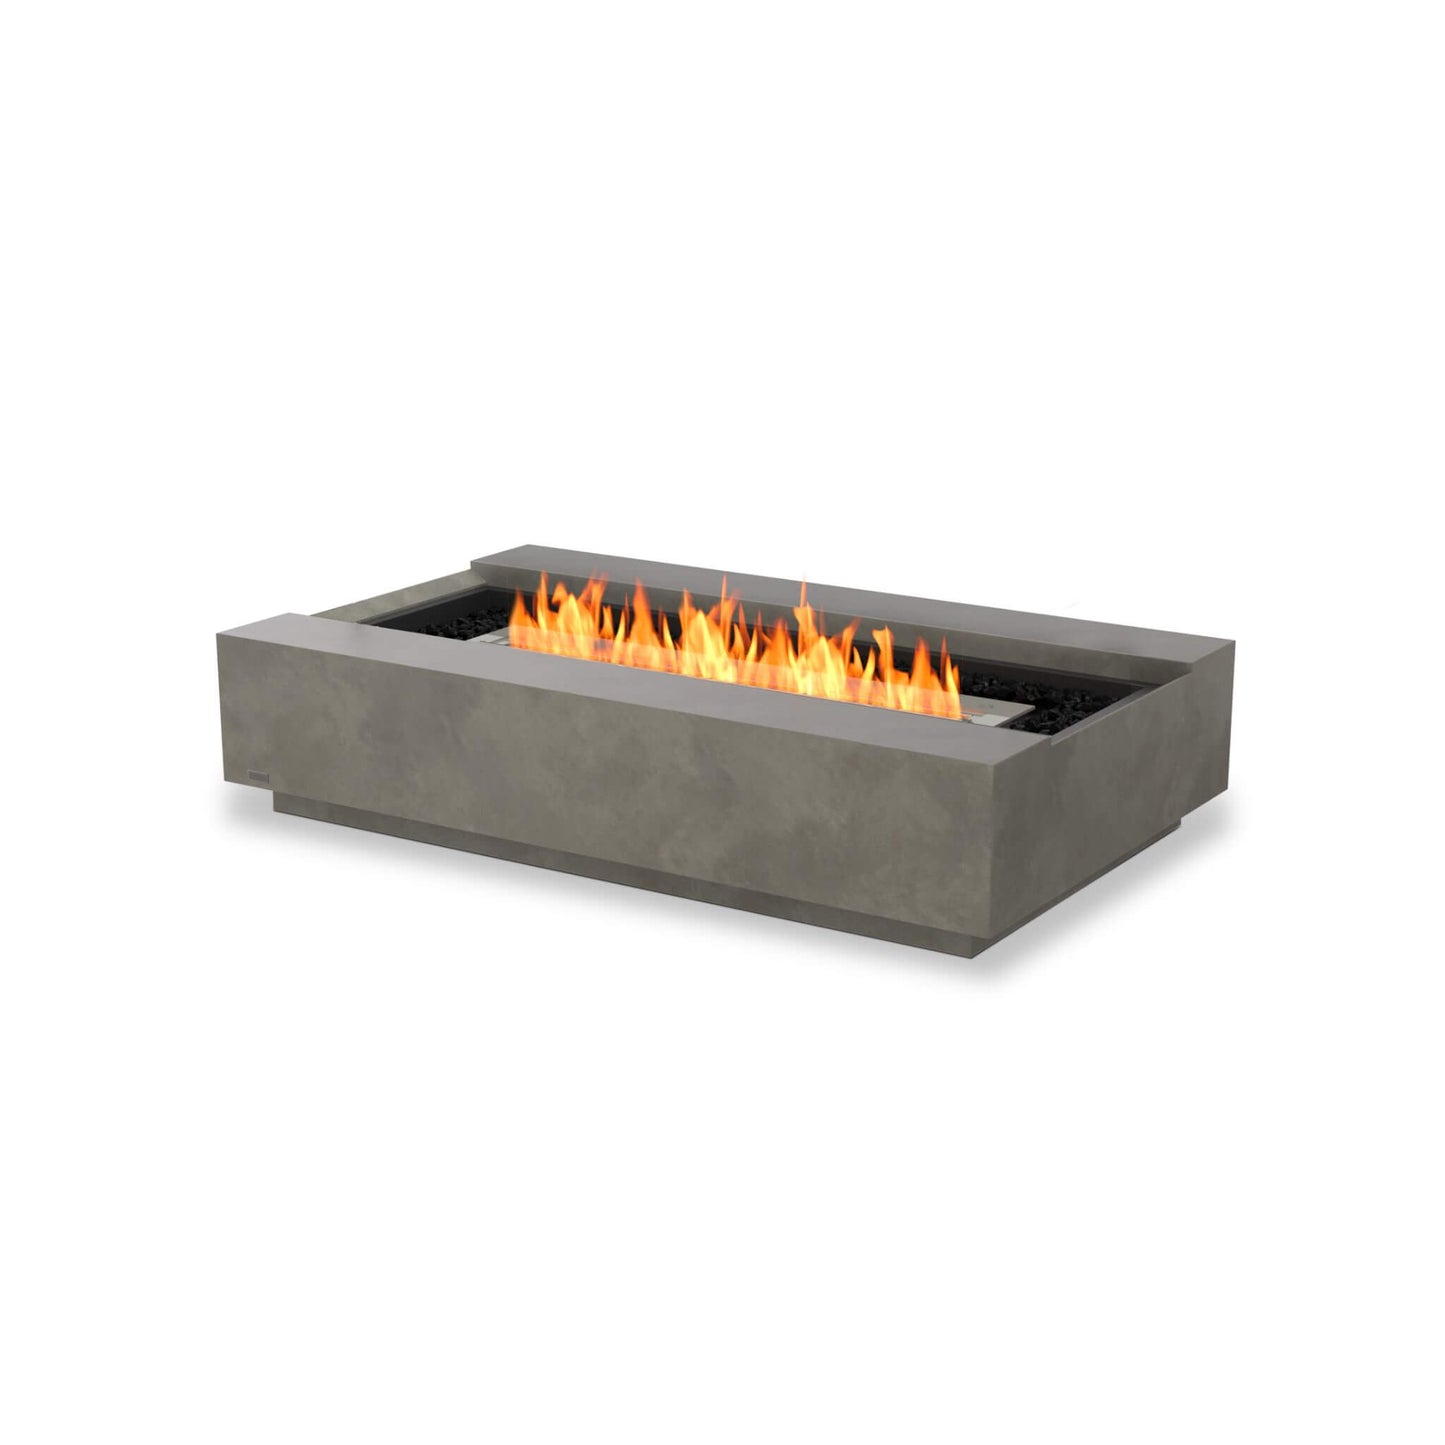 Cosmo 50 Linear Bio Ethanol Concrete Fire Pit Coffee Table with stainess steel burner  in Natural grey for Indoor & Outdoor Heating by Ecosmart Fire